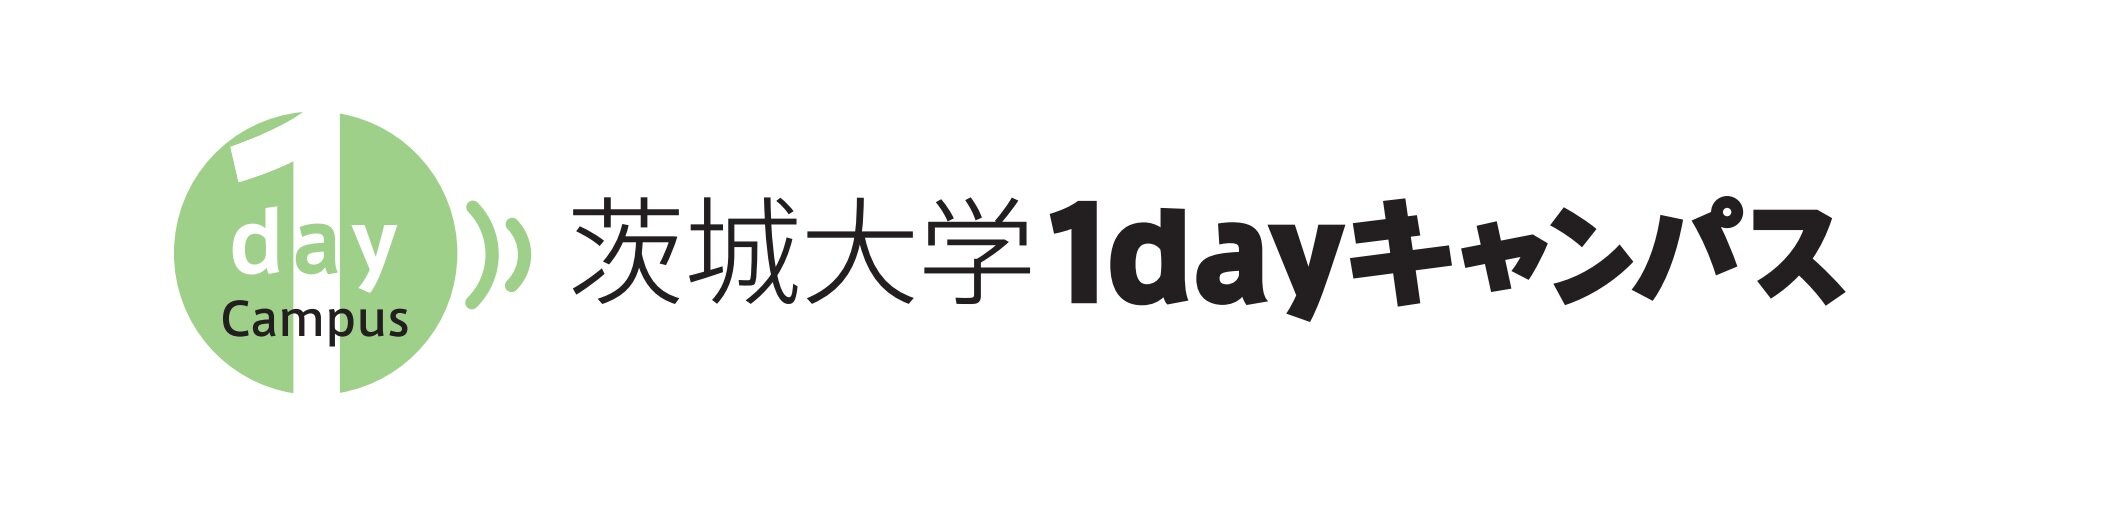 １dayキャンパス